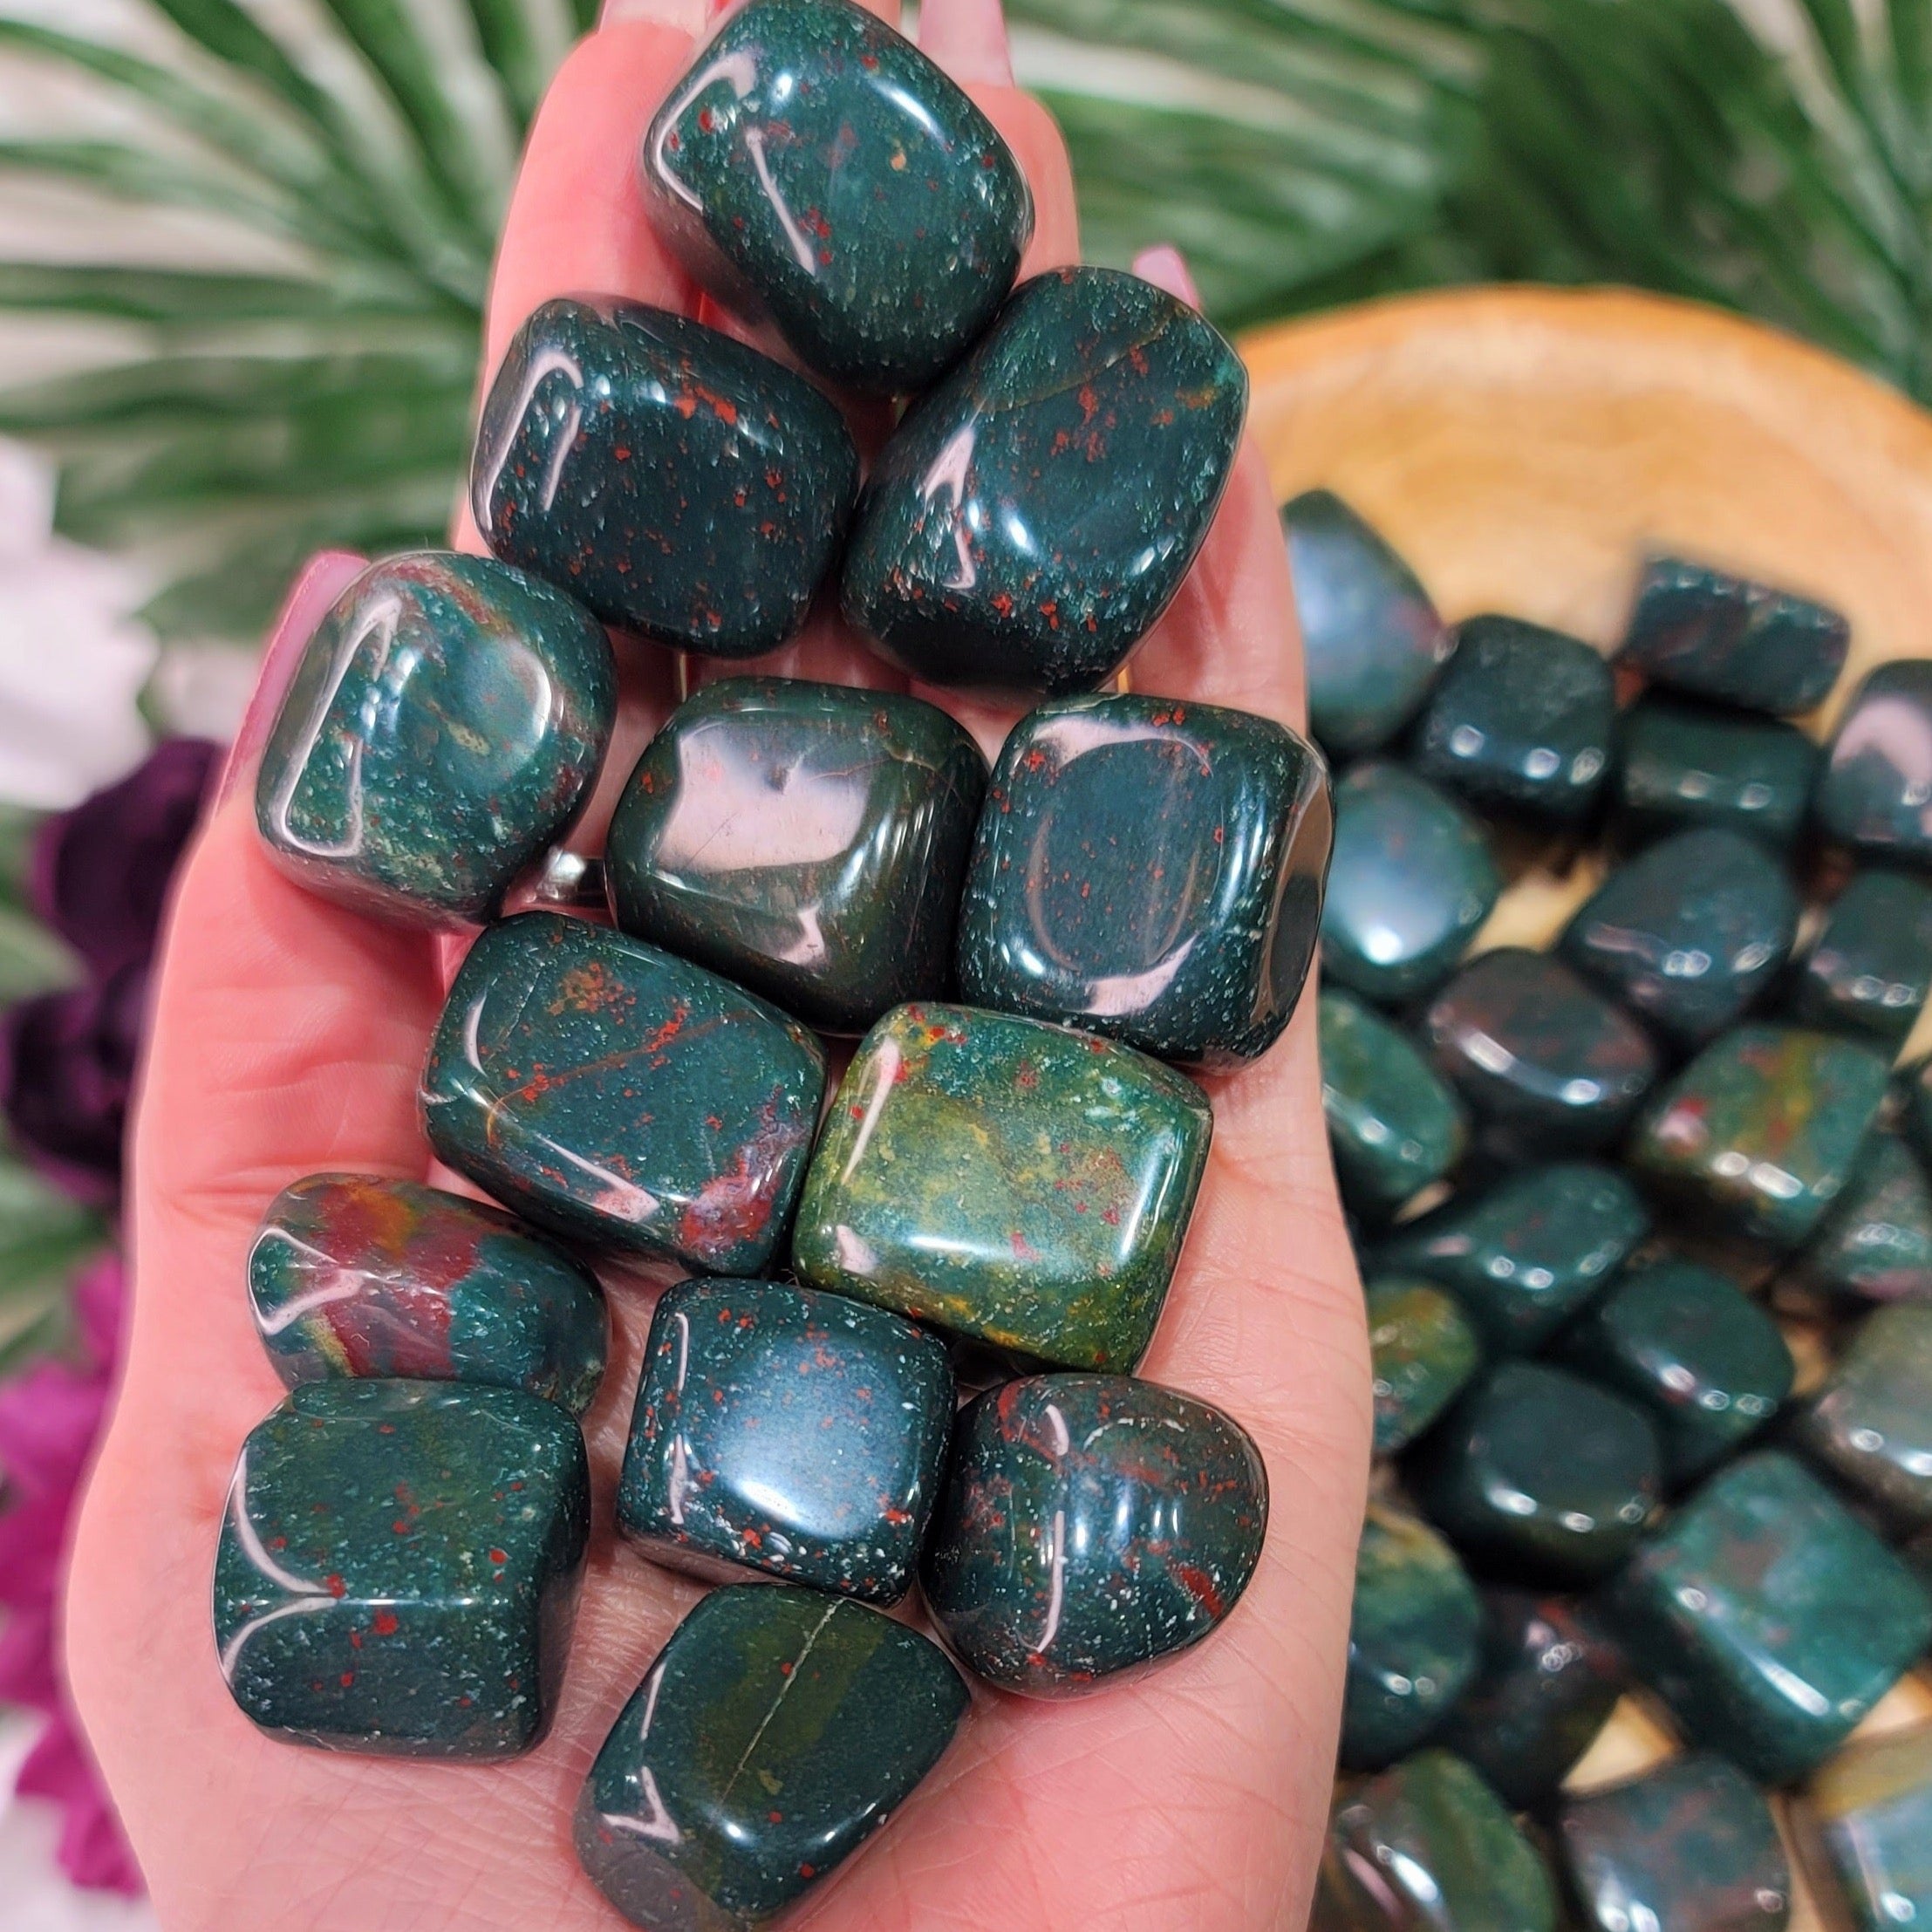 Bloodstone Tumble for Courage, Strength and Vitality